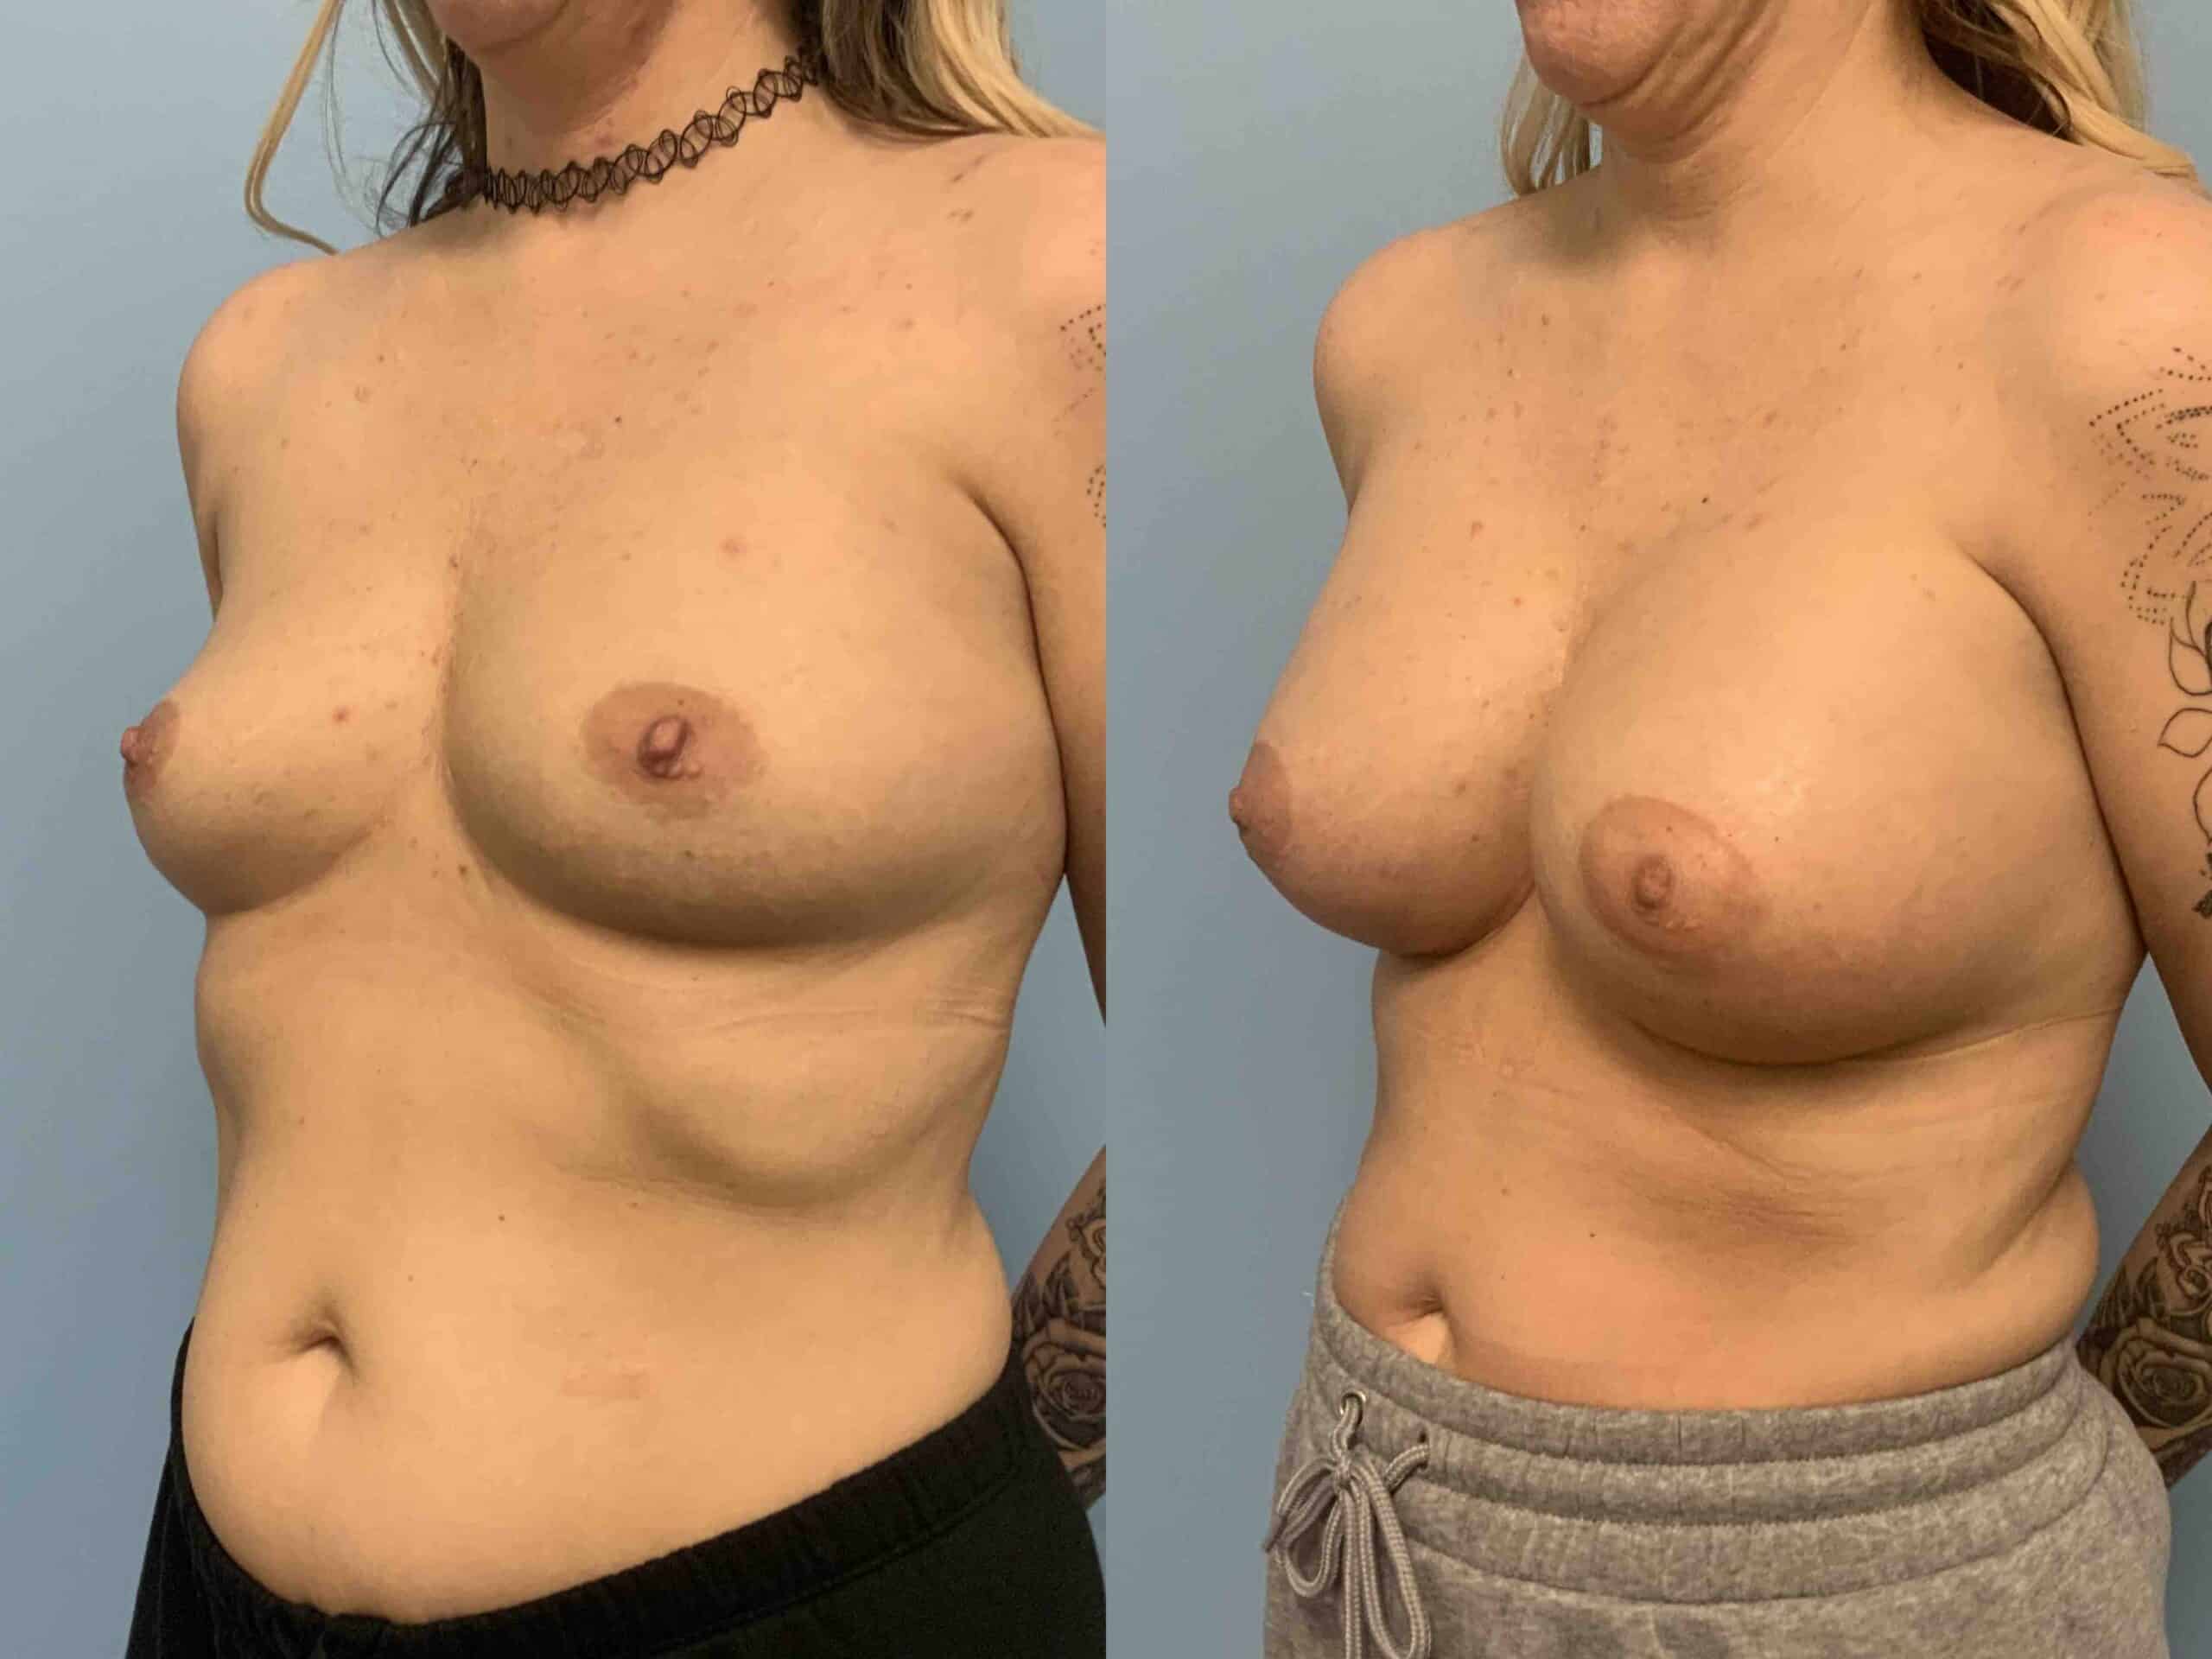 Before and after, 1 mo post op from Breast Augmentation, Level III Muscle Release performed by Dr. Paul Vanek (diagonal view)